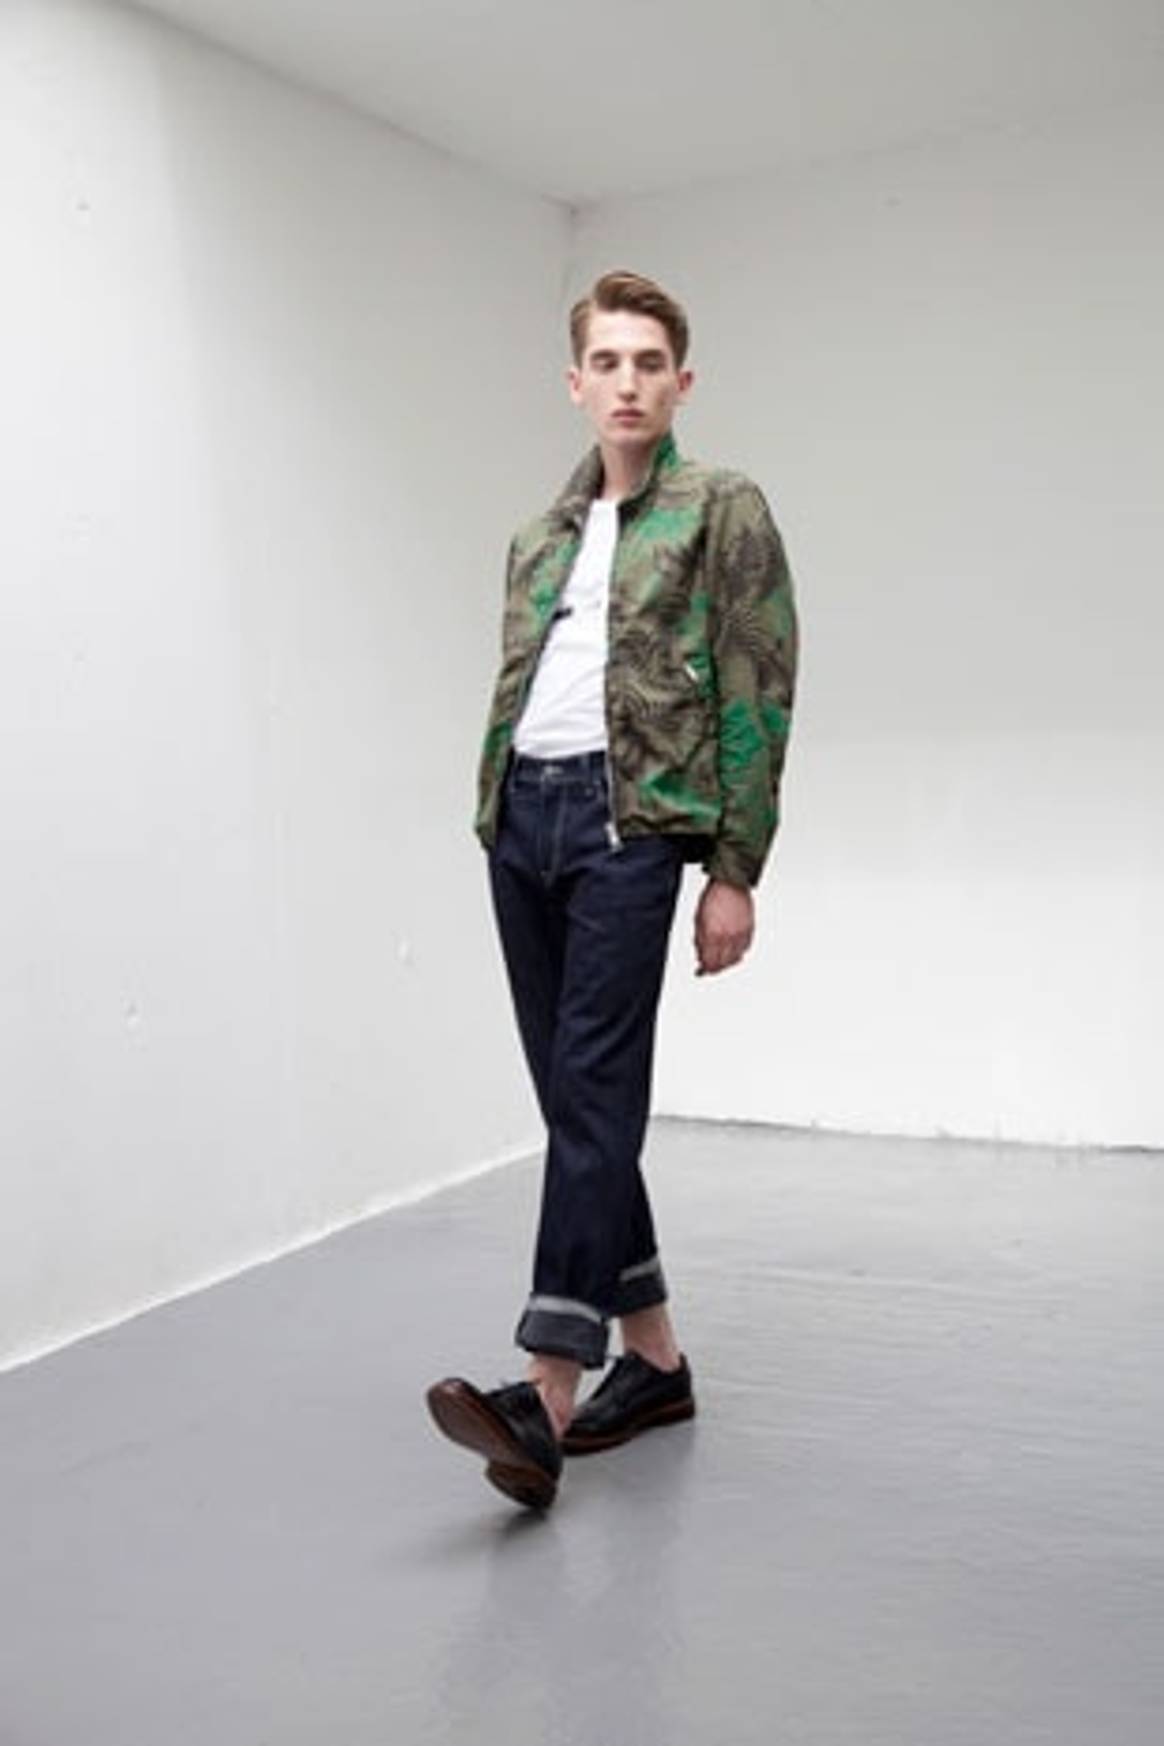 Menswear to grow 22 percent in next five years